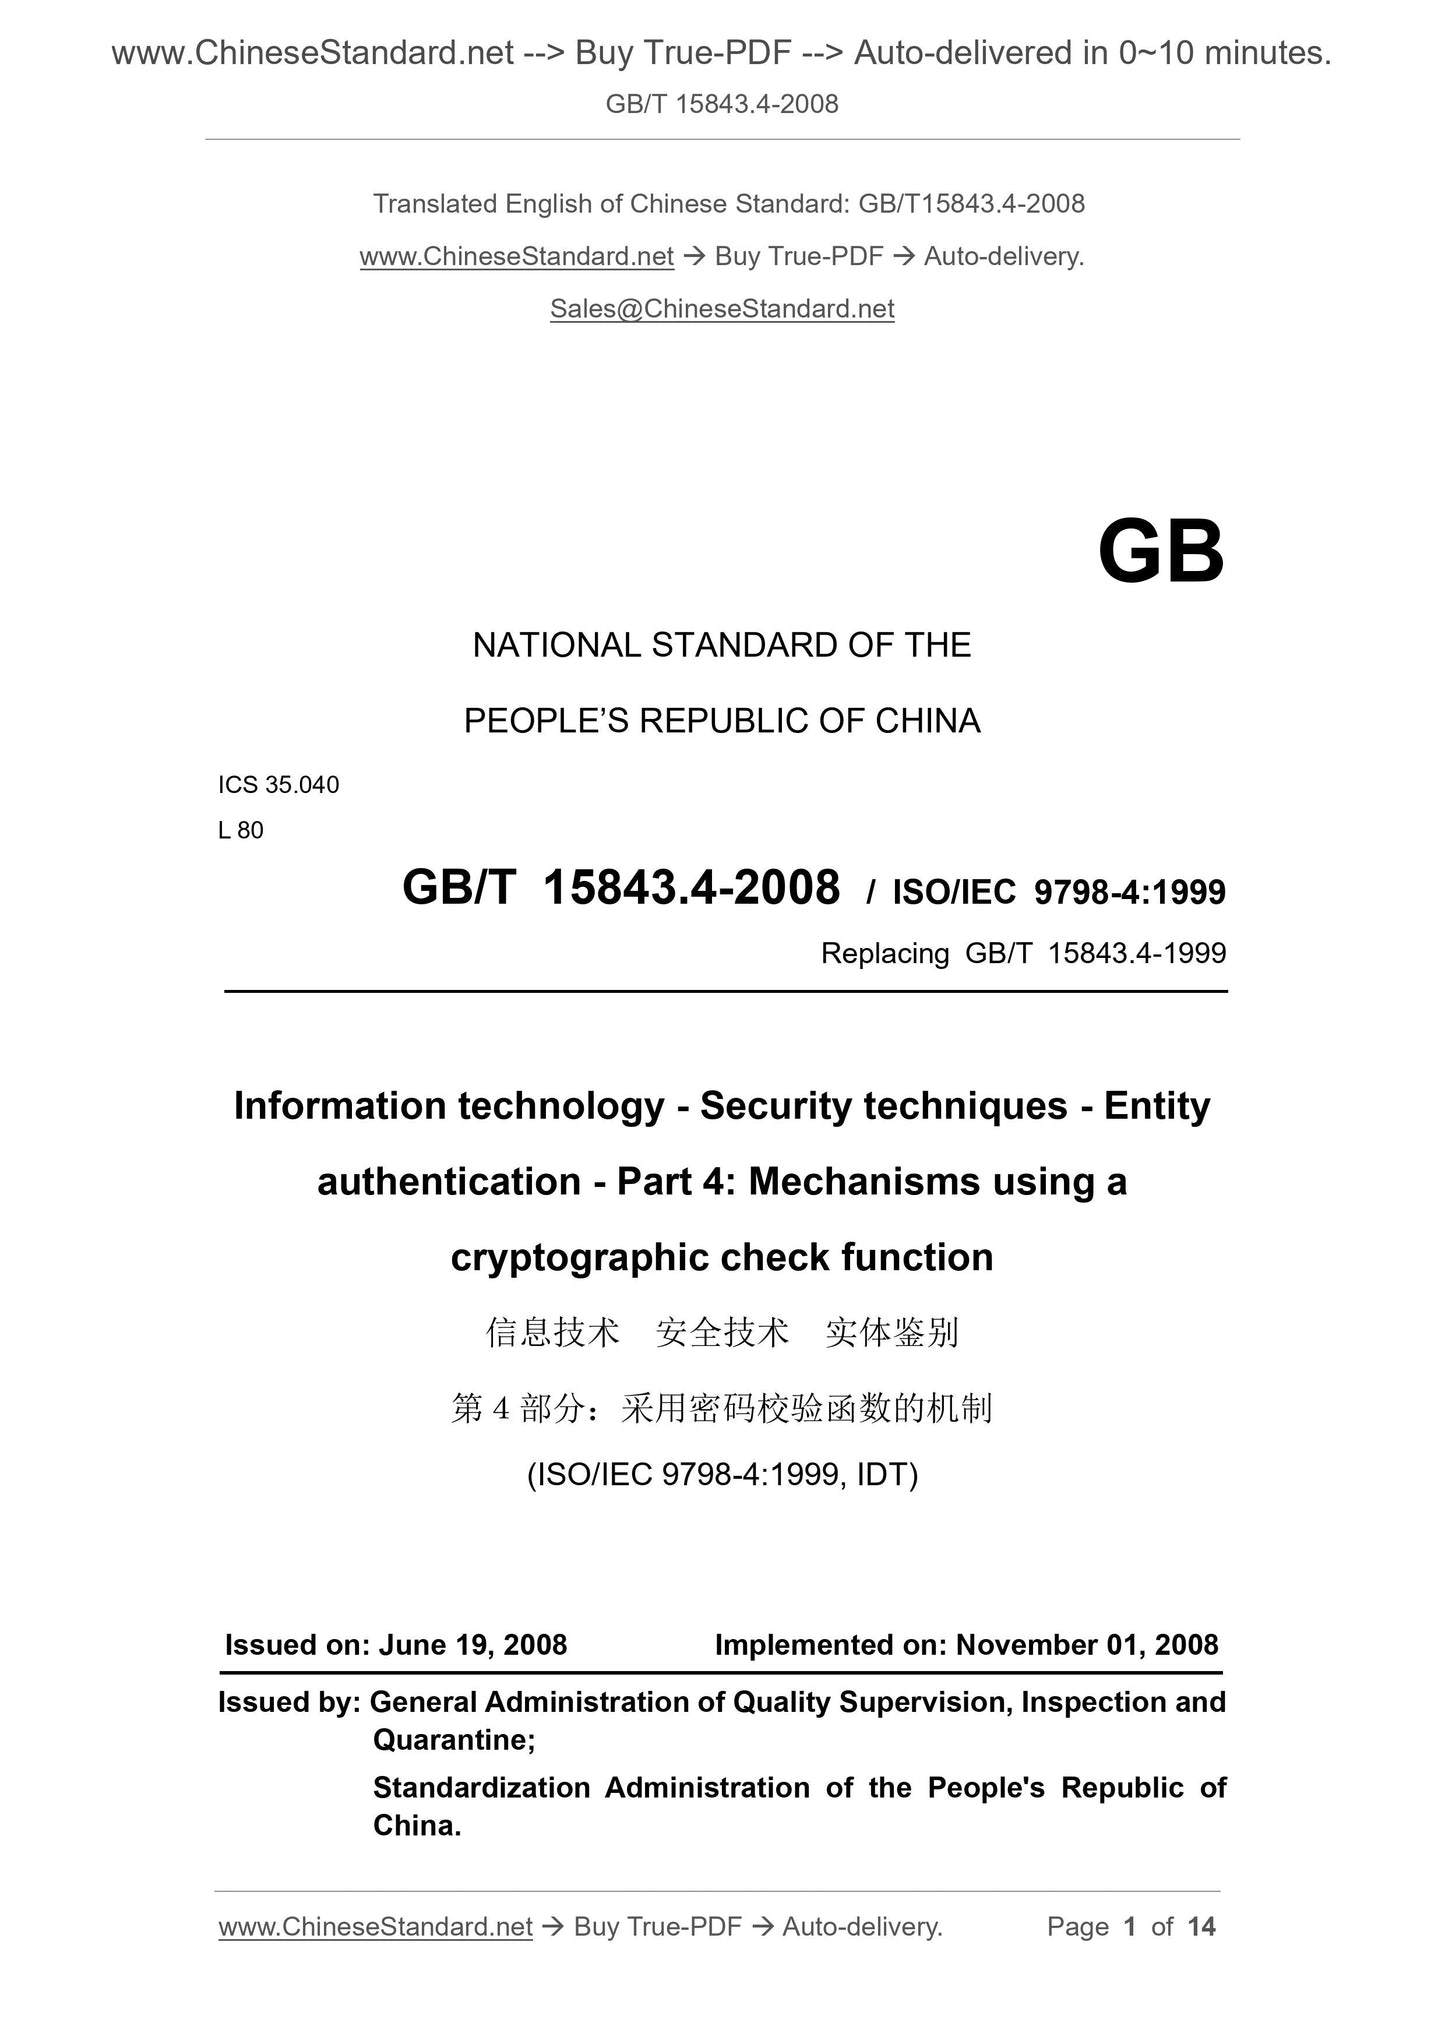 GB/T 15843.4-2008 Page 1